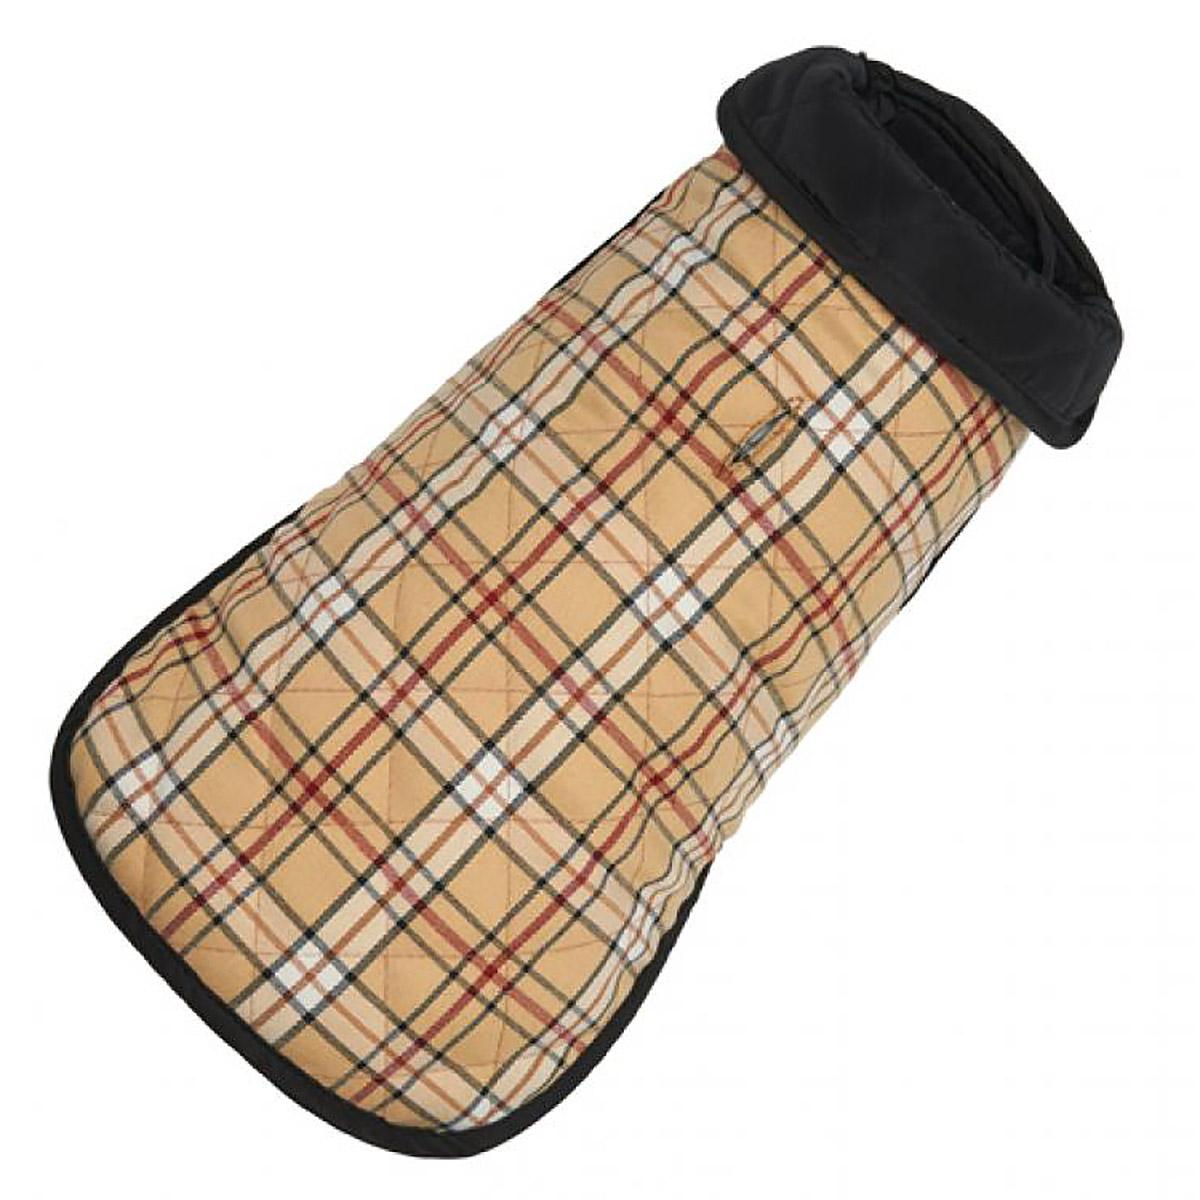 Diamond Quilted Reversible Dog Coat by Up Country - Tan Plaid and Black